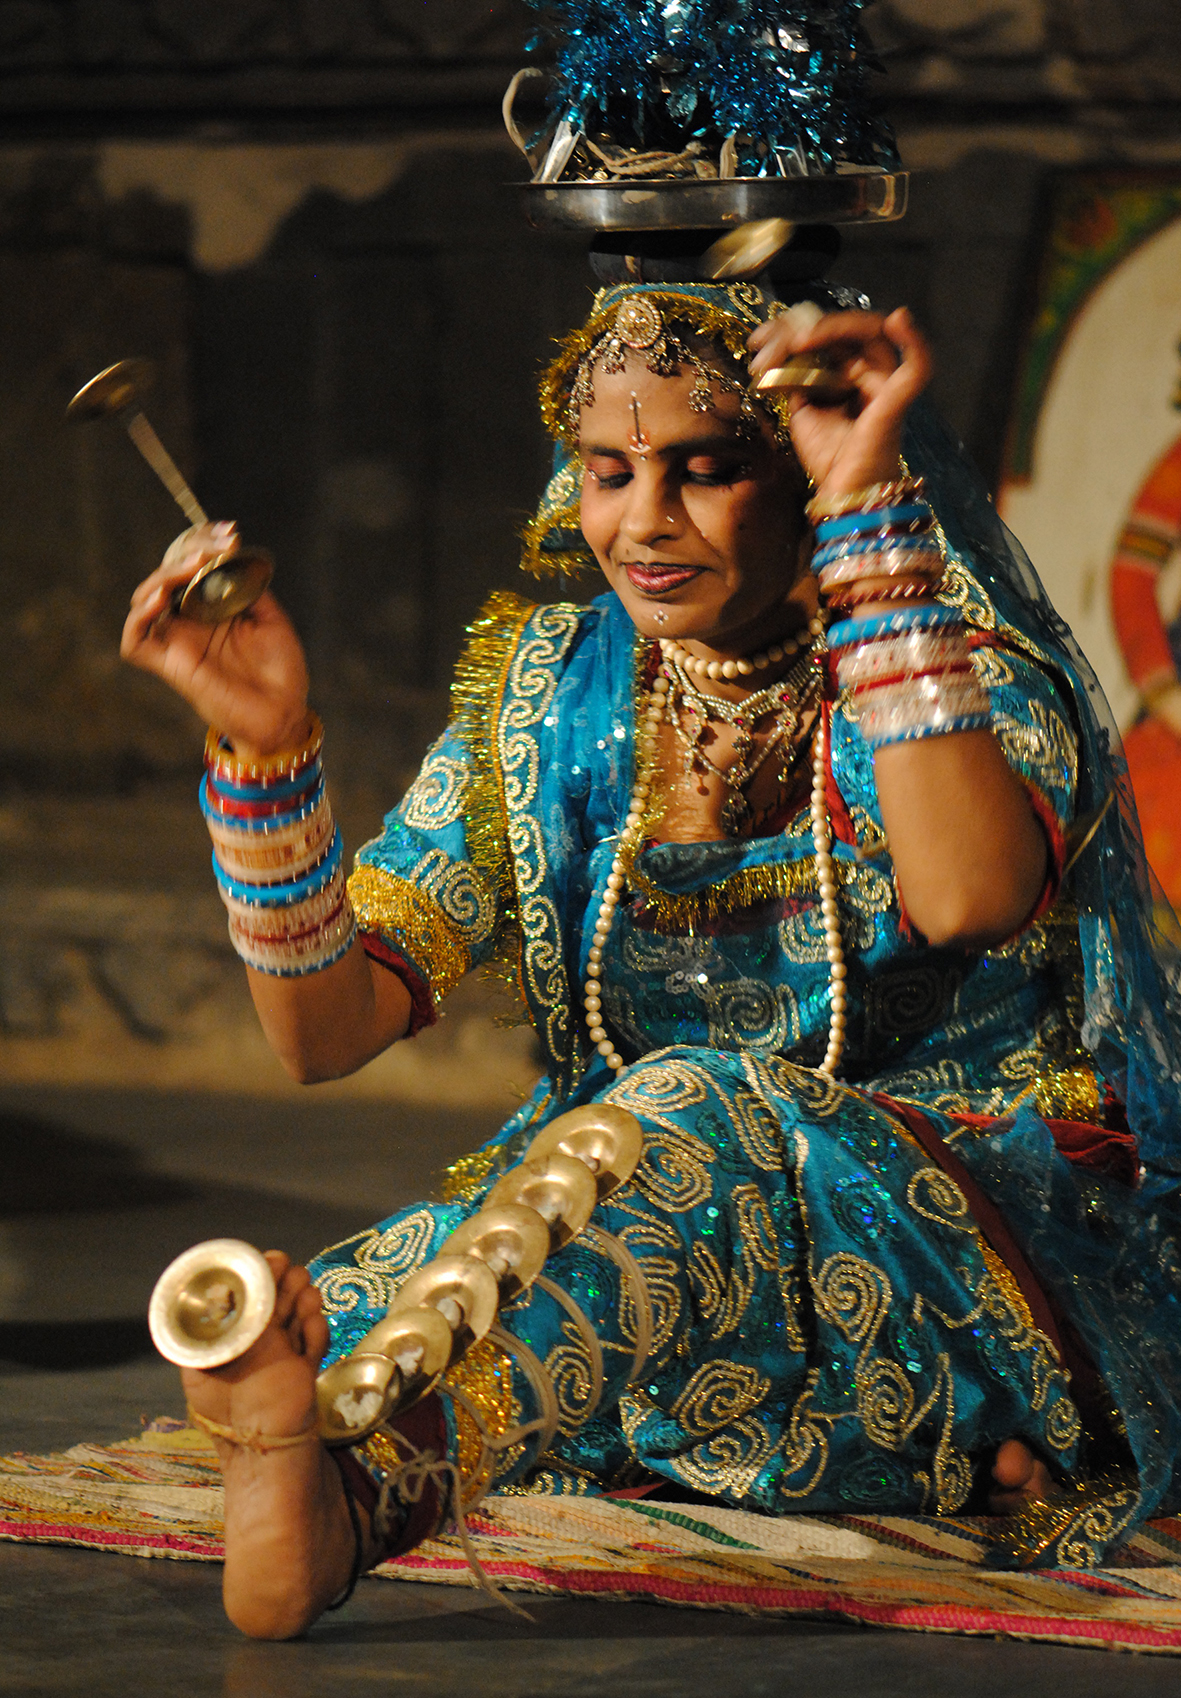 The folk Terah Taali dancer matches the background music by swinging the manjeeras (little brass disks) and striking the cymbals that are tied to different parts of her body.